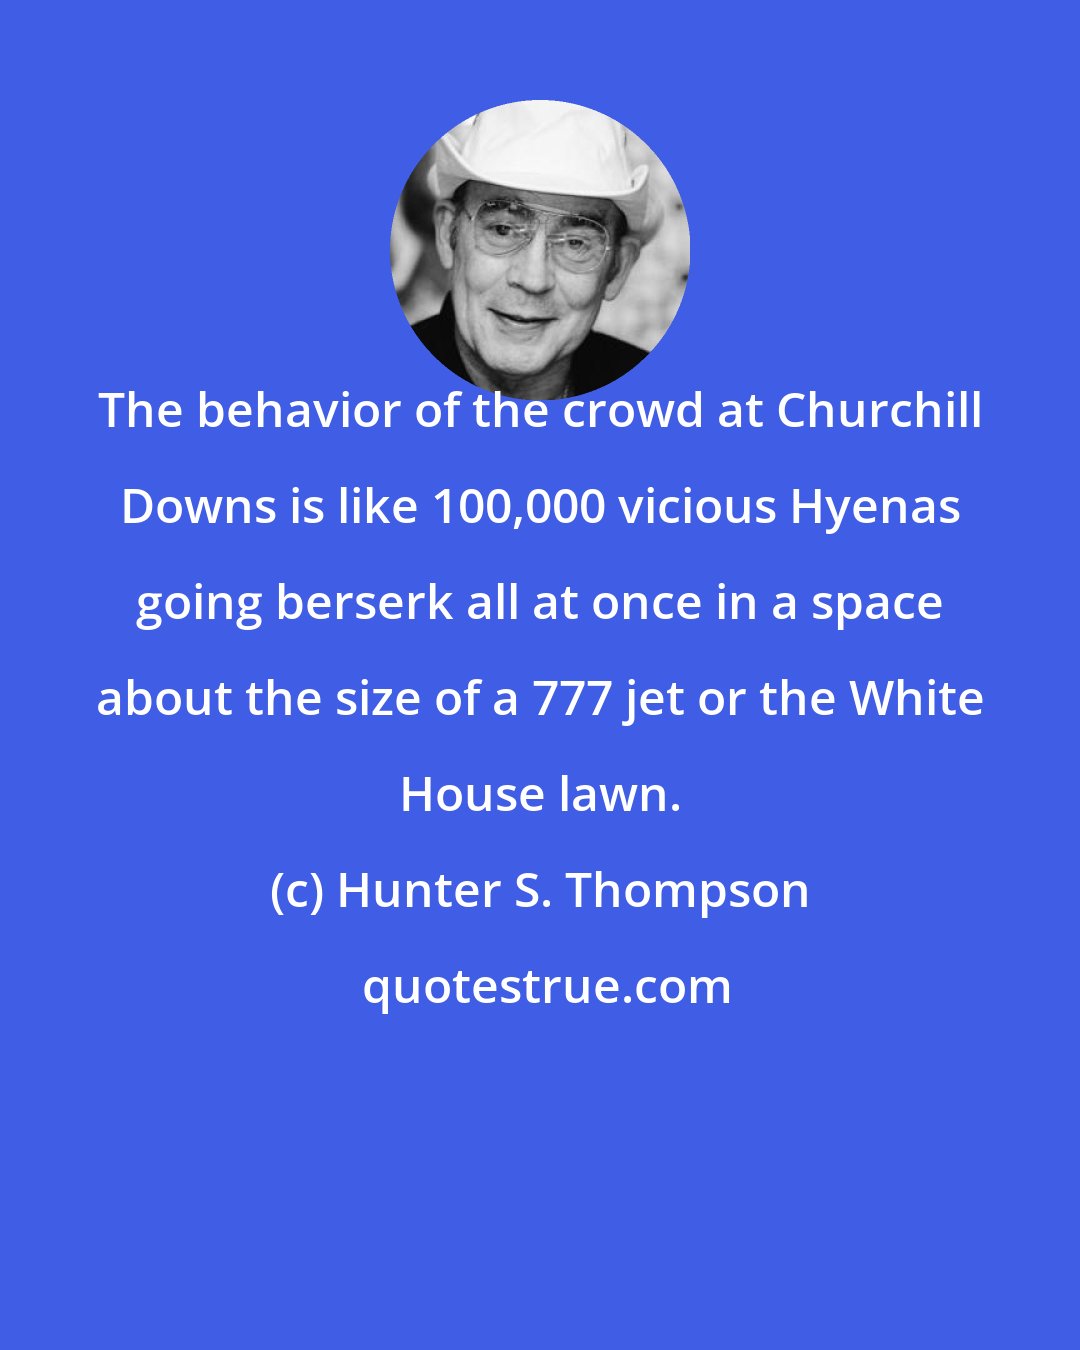 Hunter S. Thompson: The behavior of the crowd at Churchill Downs is like 100,000 vicious Hyenas going berserk all at once in a space about the size of a 777 jet or the White House lawn.